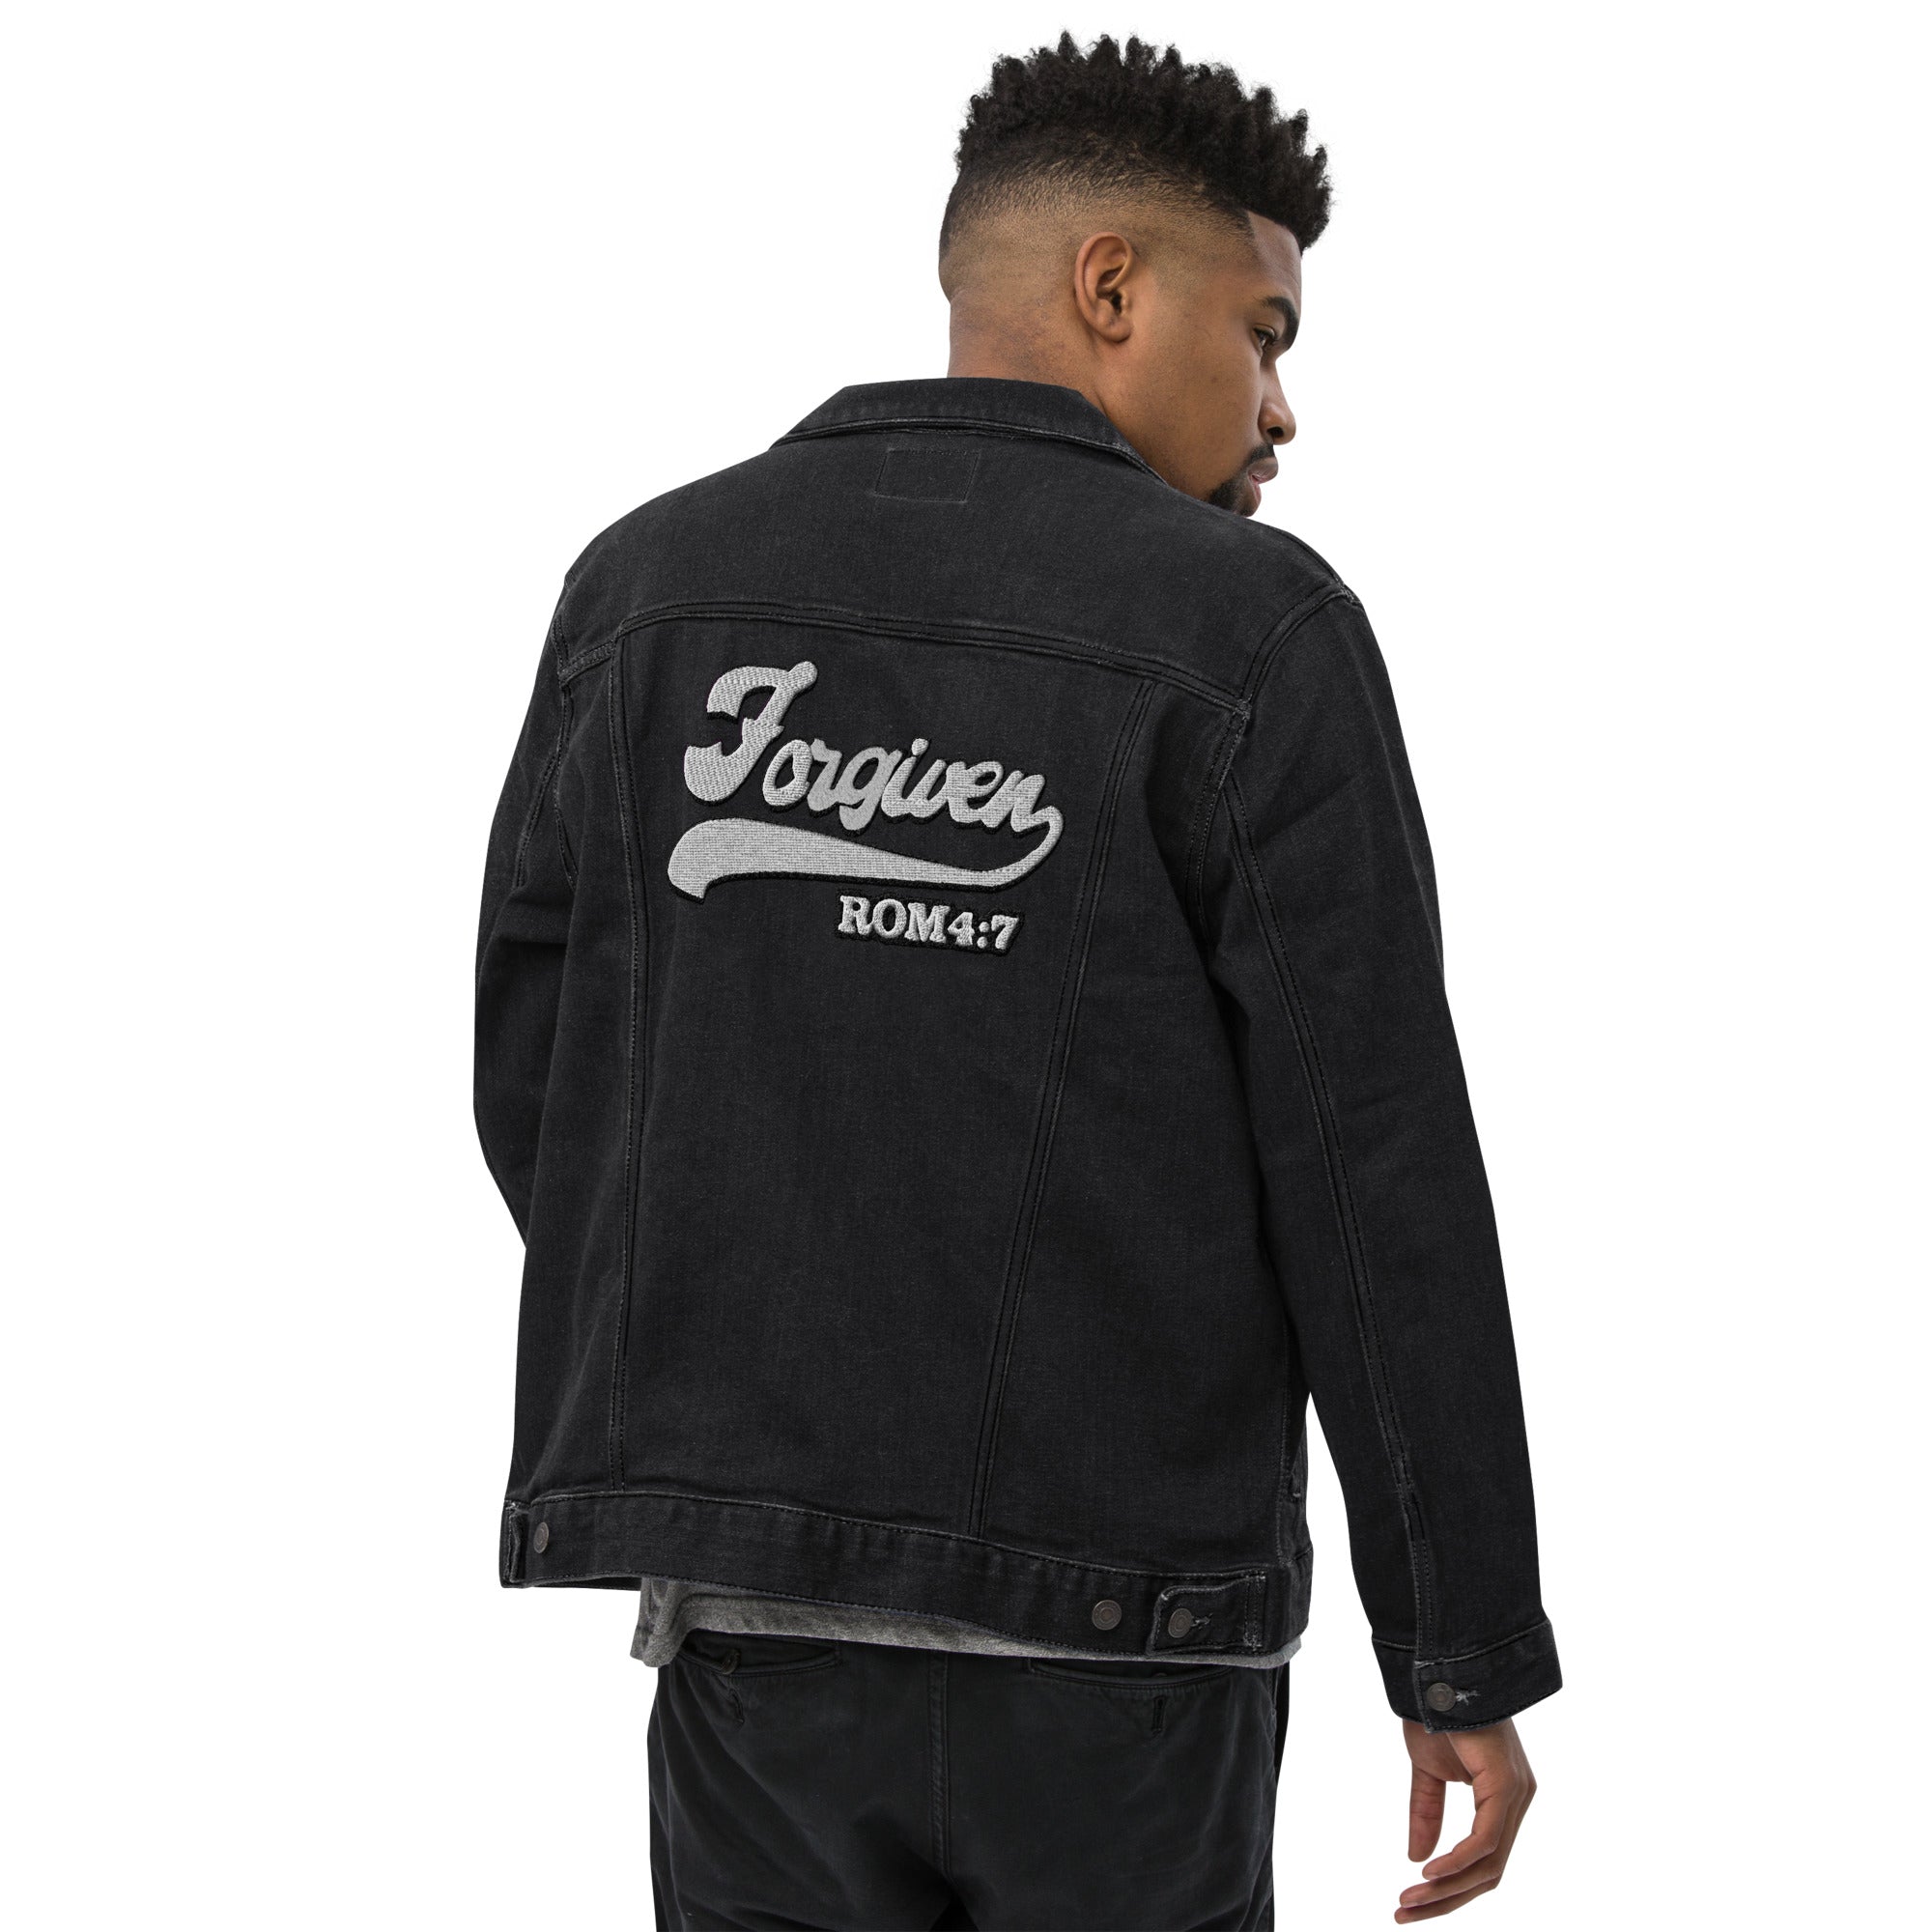 The Forgiven Front and Back Unisex Black Jean Jacket